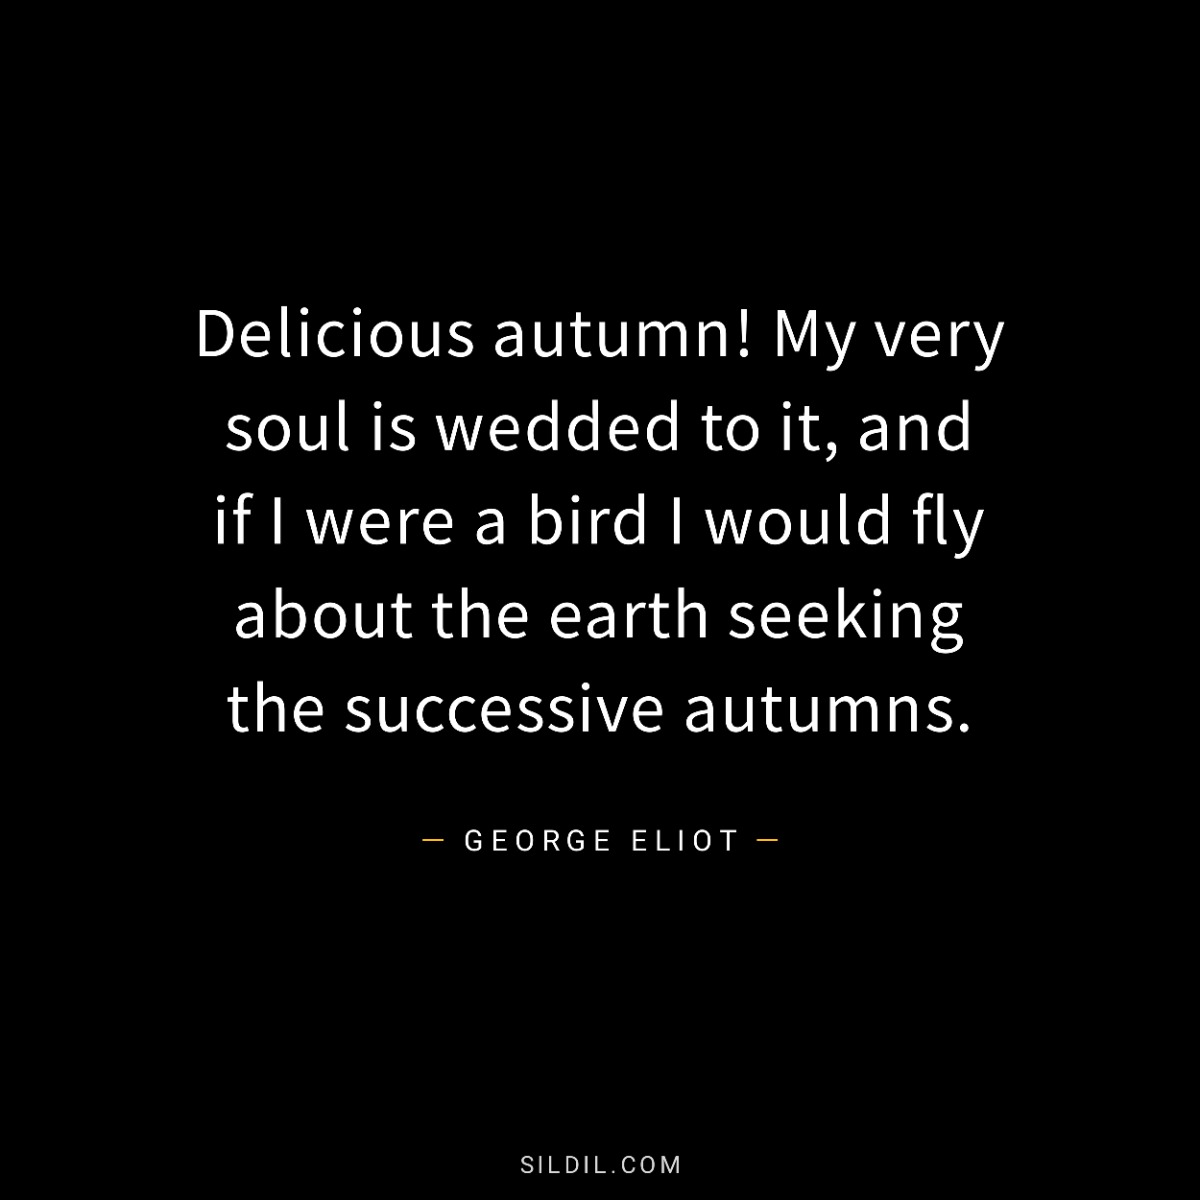 Delicious autumn! My very soul is wedded to it, and if I were a bird I would fly about the earth seeking the successive autumns.